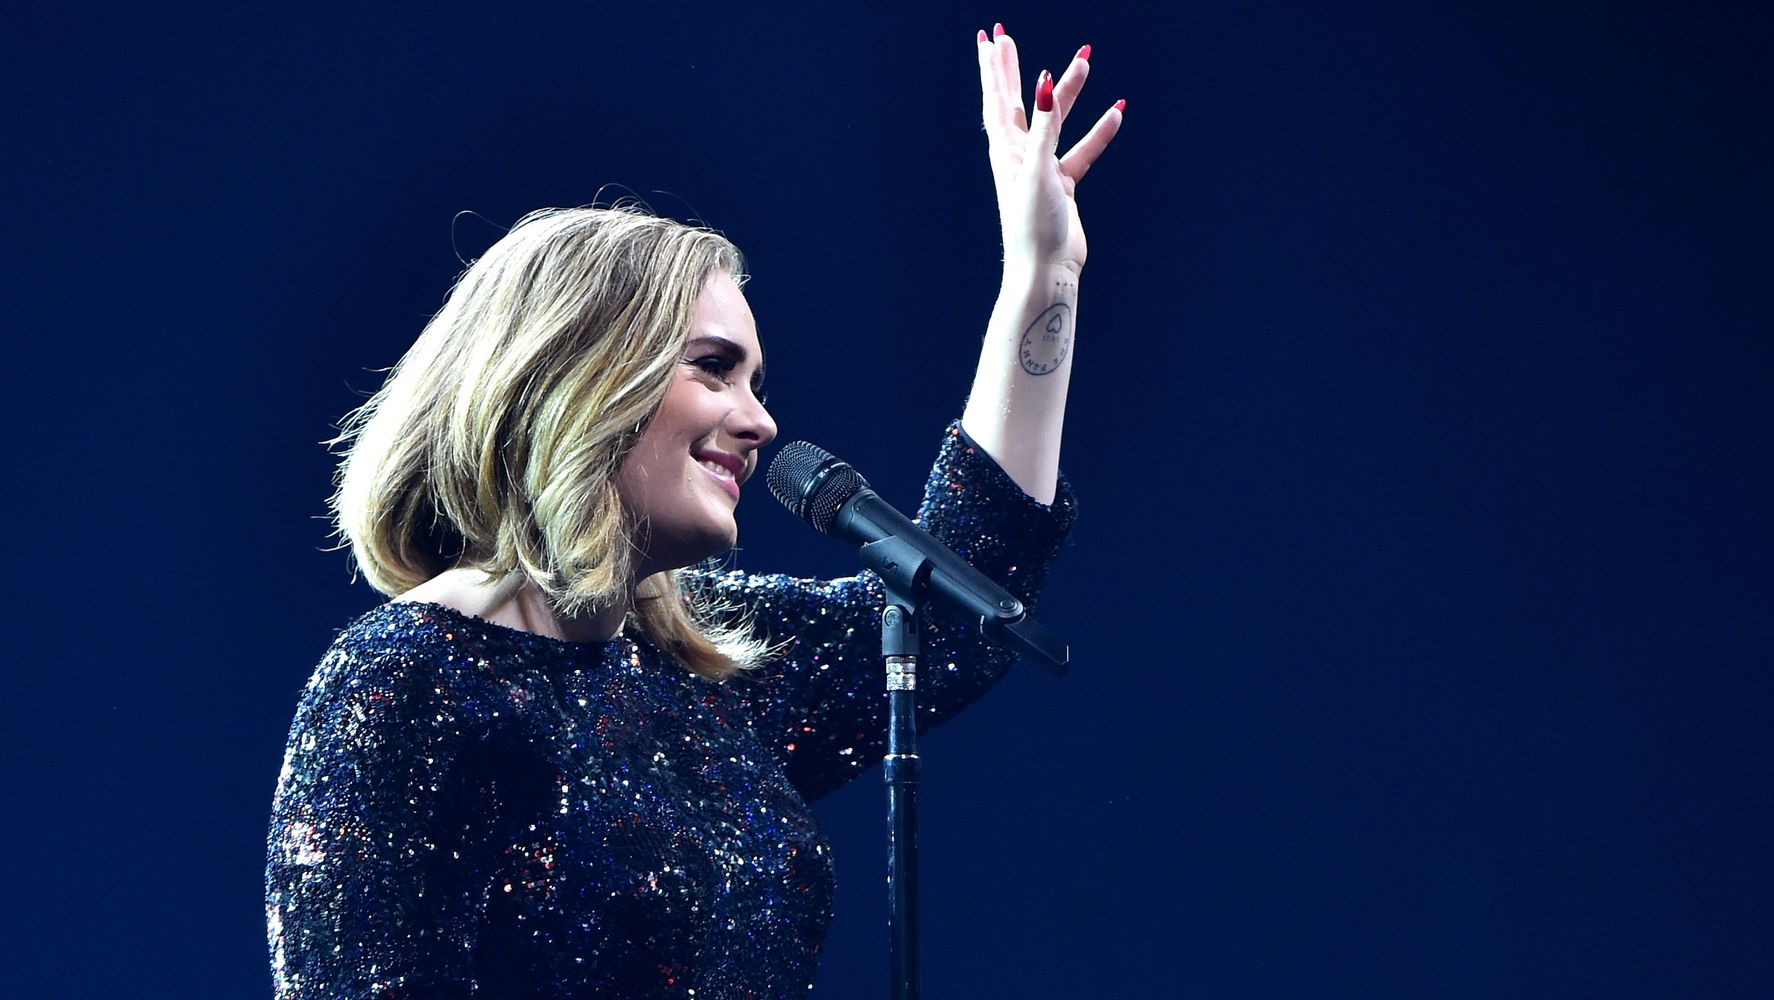 Adele Adorably Calls Couple Onstage After They Got Engaged In The Crowd.